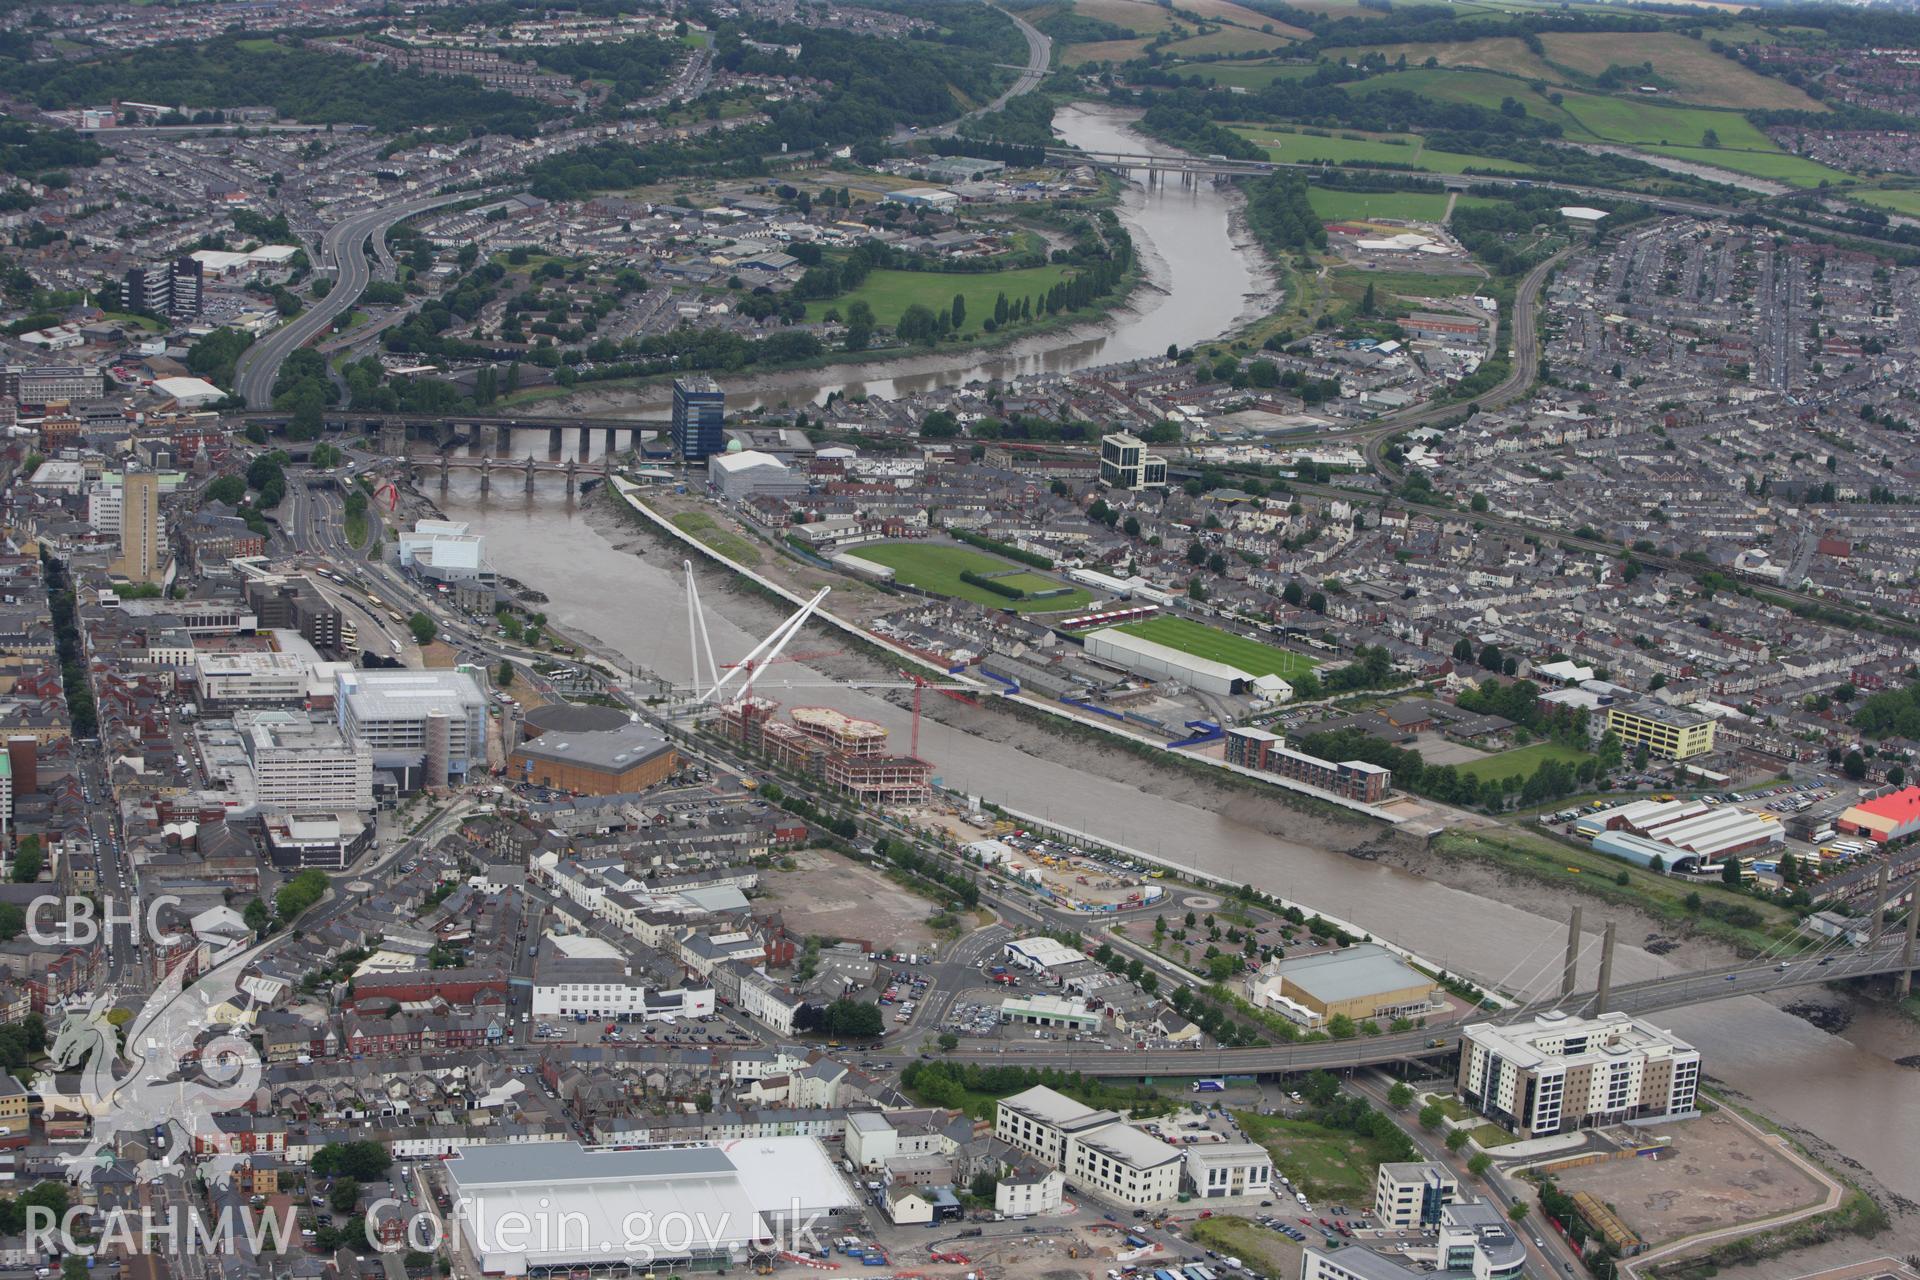 RCAHMW colour oblique aerial photograph of Newport, Gwent. Taken on 09 July 2009 by Toby Driver